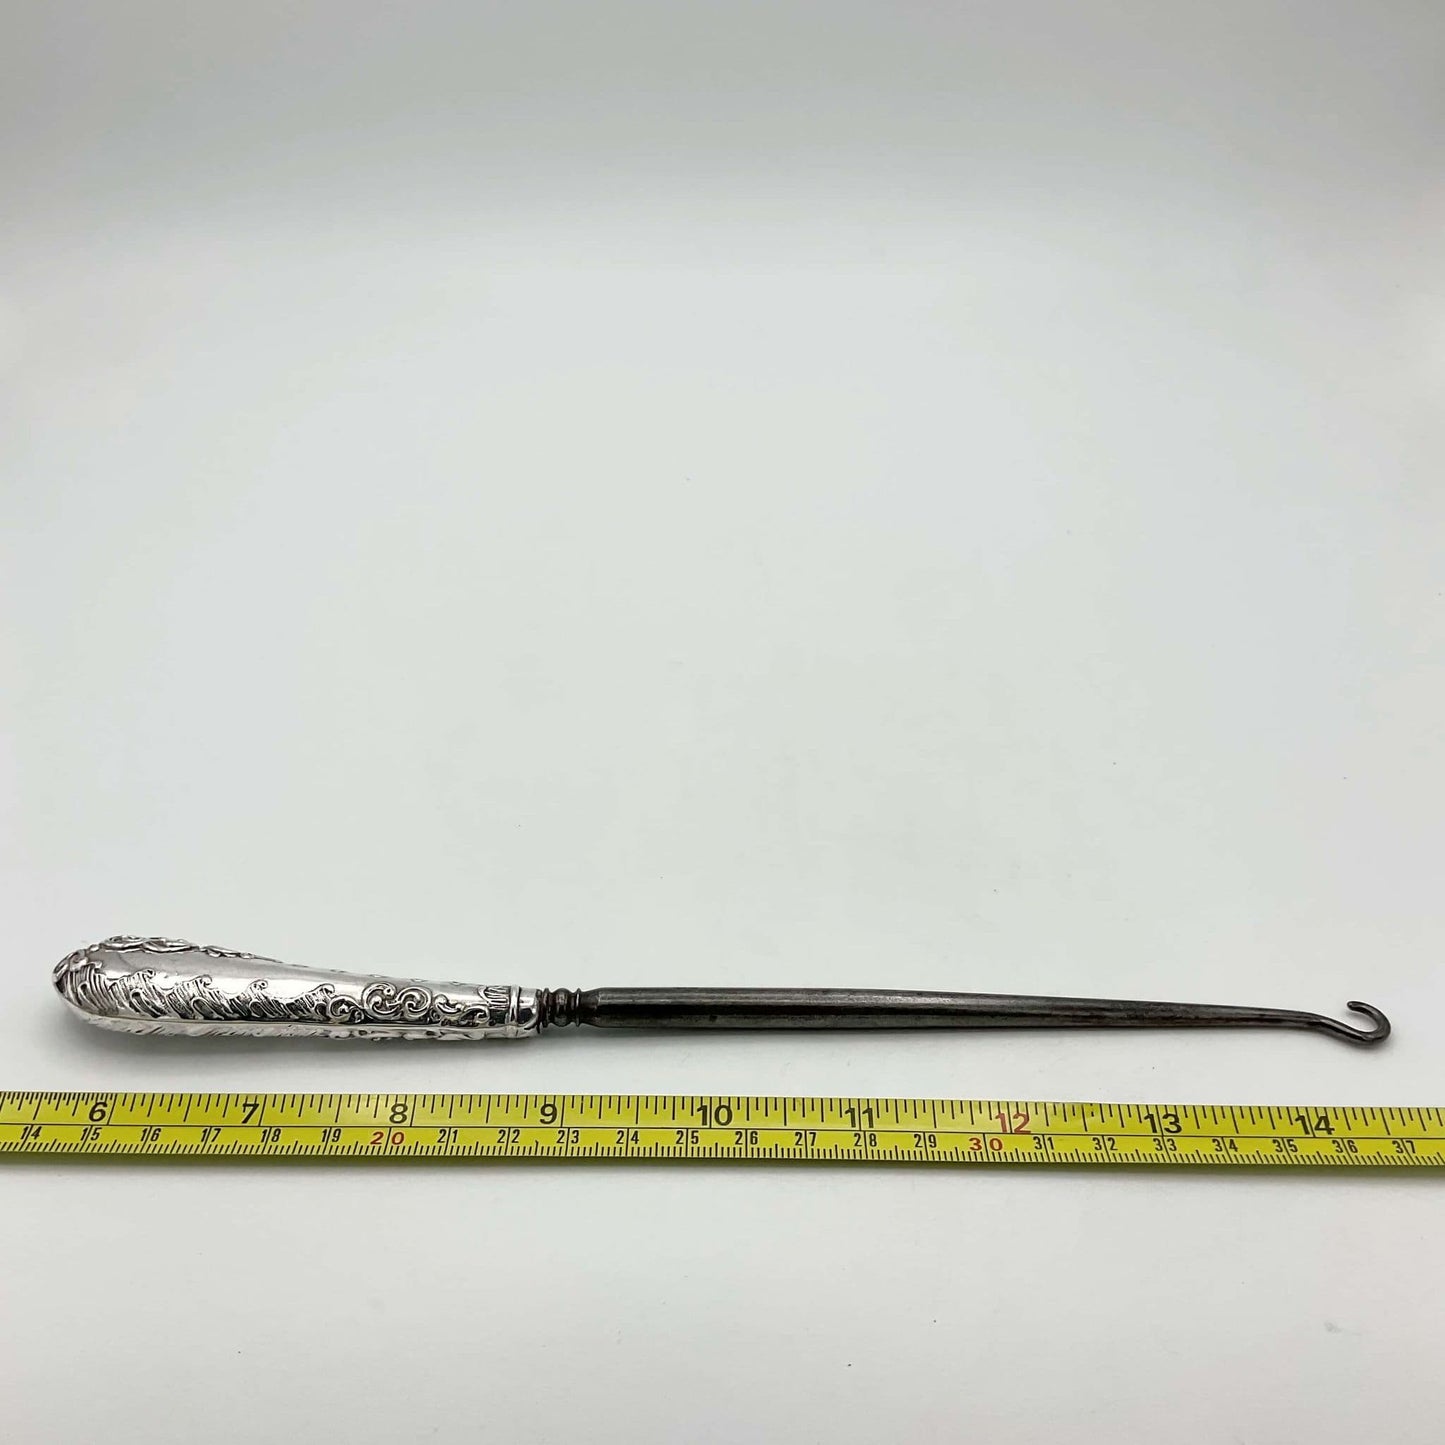 silver button hook next to tape measure showing length as 23cm